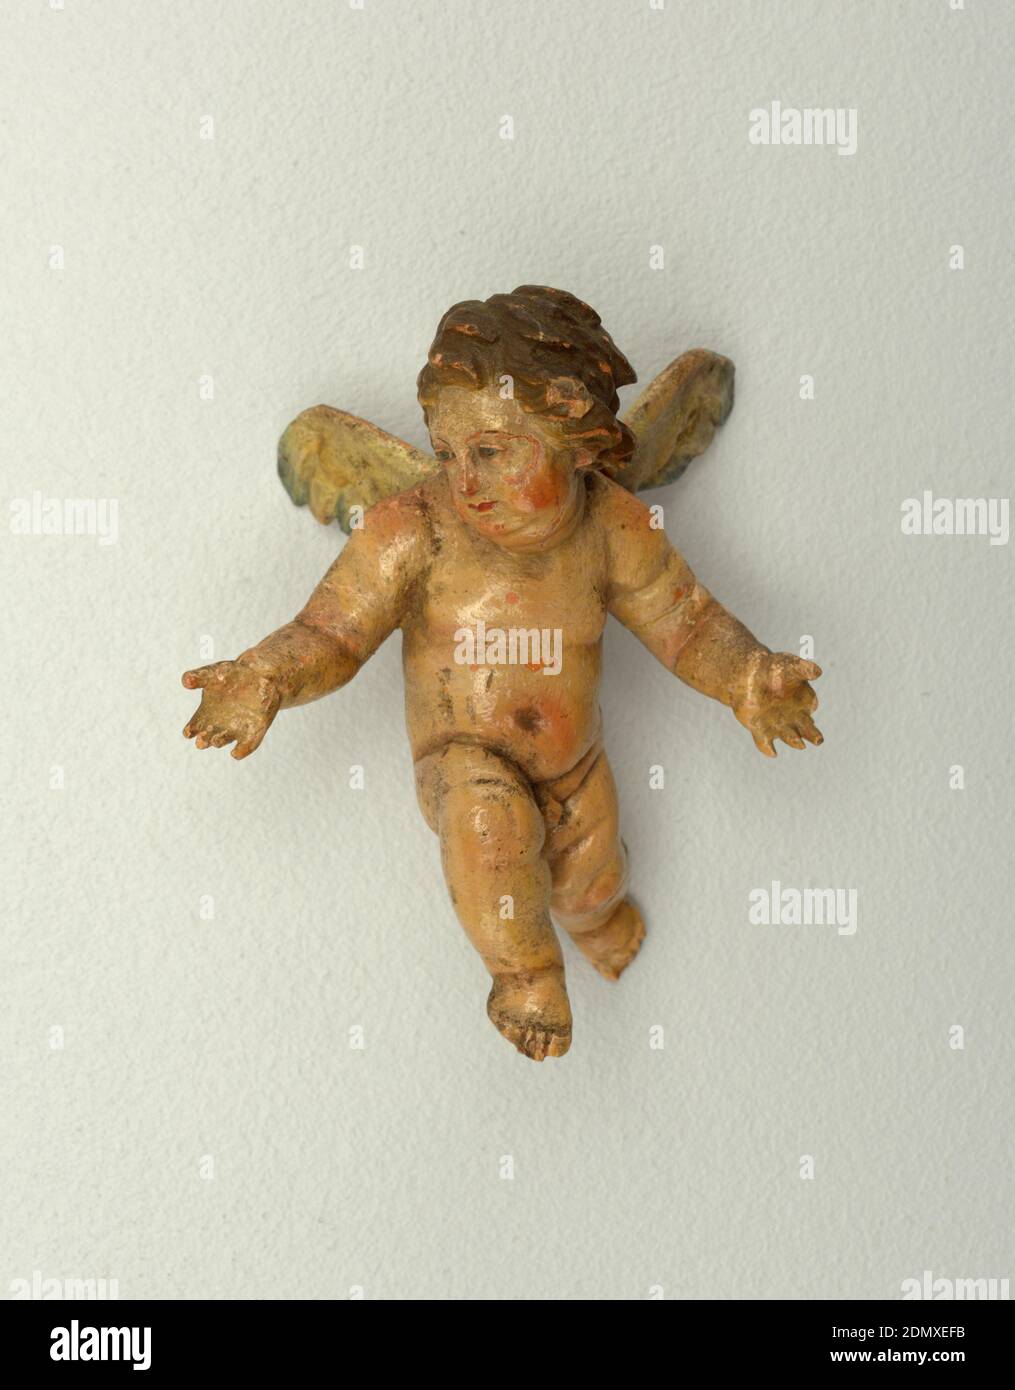 Angel figure, Painted papier-mâché, Cherub with outstretched arms, one leg forward, head facing to his right. Painted accents on wings. ., Italy, 18th century, figures, Decorative Arts, Angel figure Stock Photo